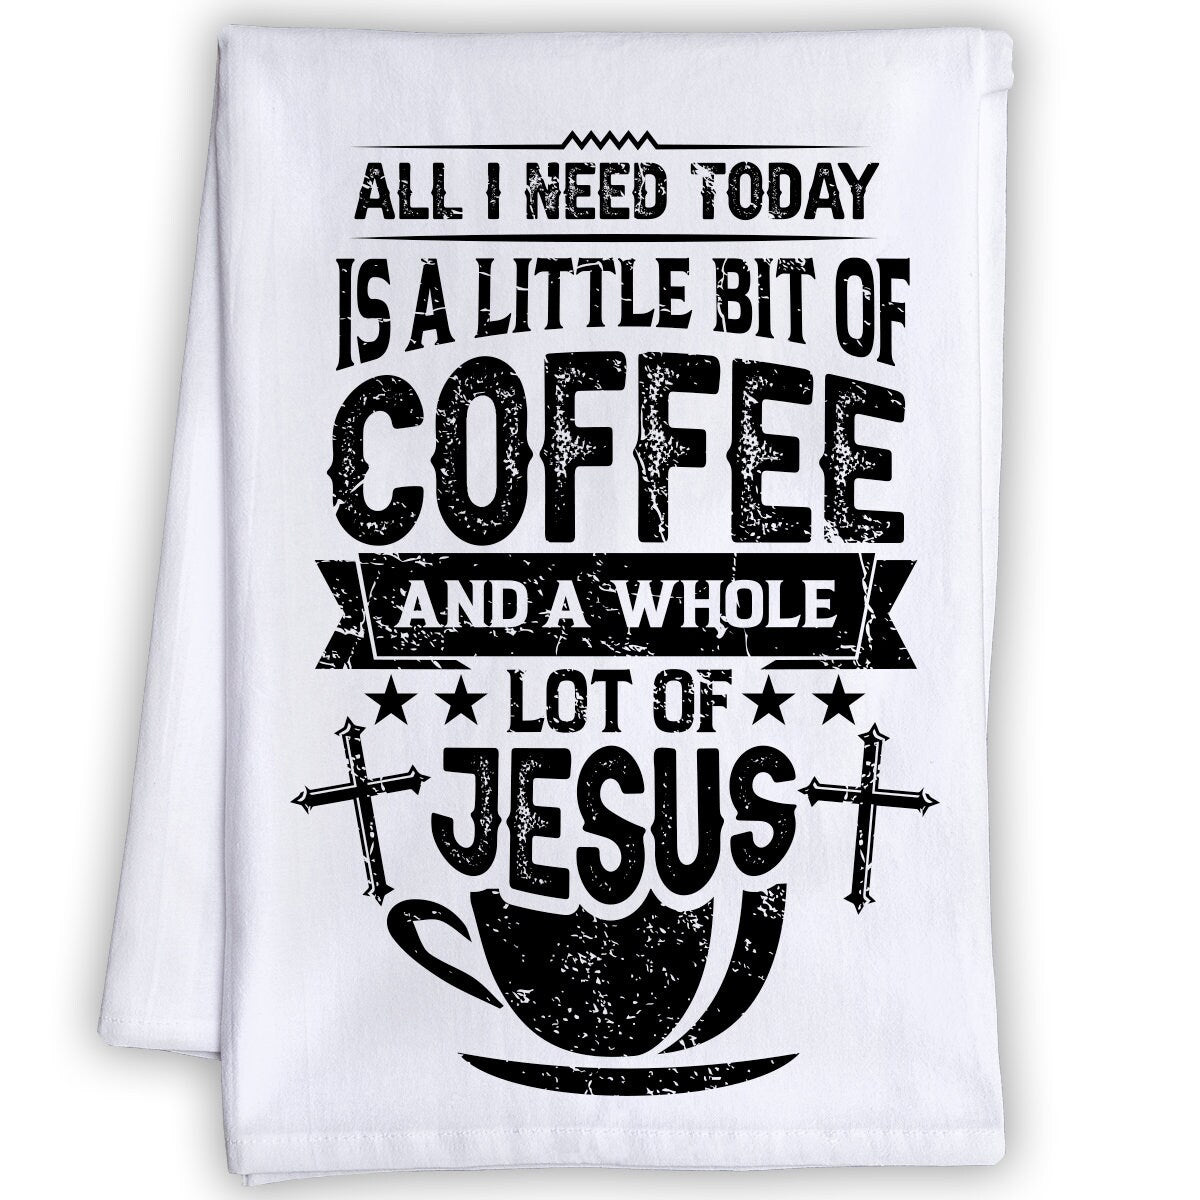 Funny Kitchen Tea Towels-Little Bit of Coffee and a Whole Lot of Jesus-Humorous Flour Sack Dish Towel- Gift for Christians and Coffee Lovers Lone Star Art 